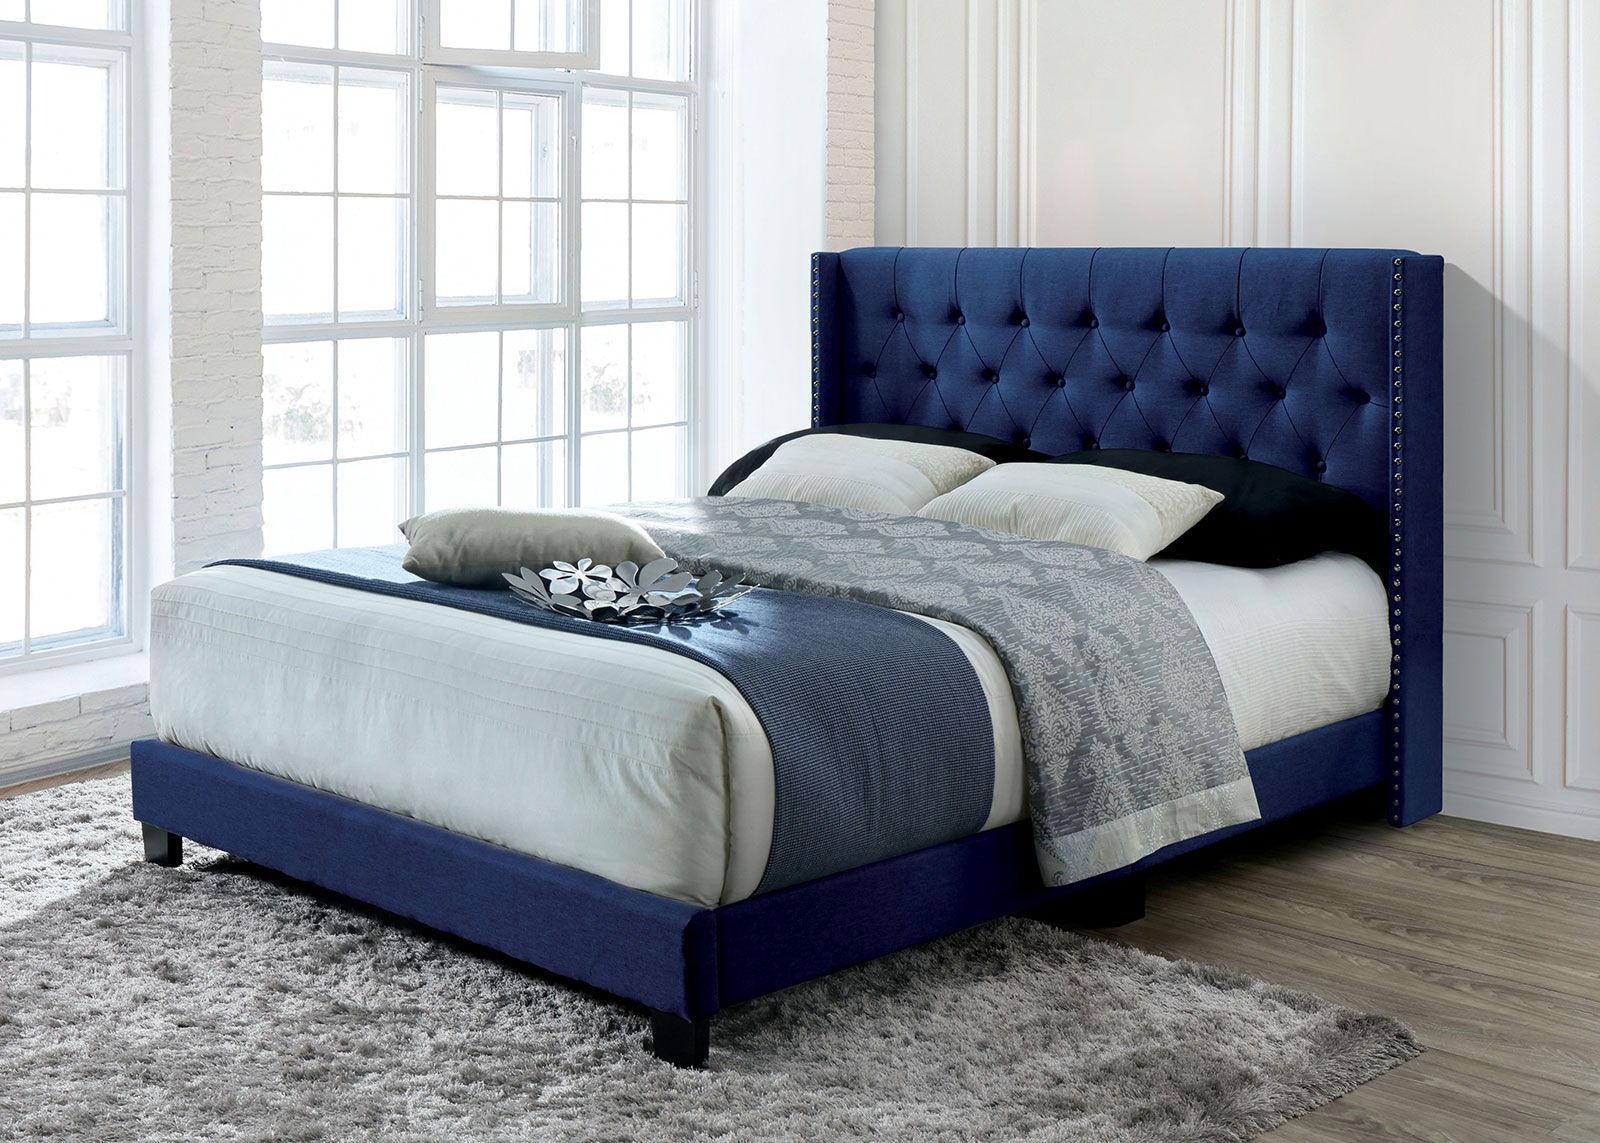 Furniture of America - Jenelle - Twin Bed - Navy - 5th Avenue Furniture